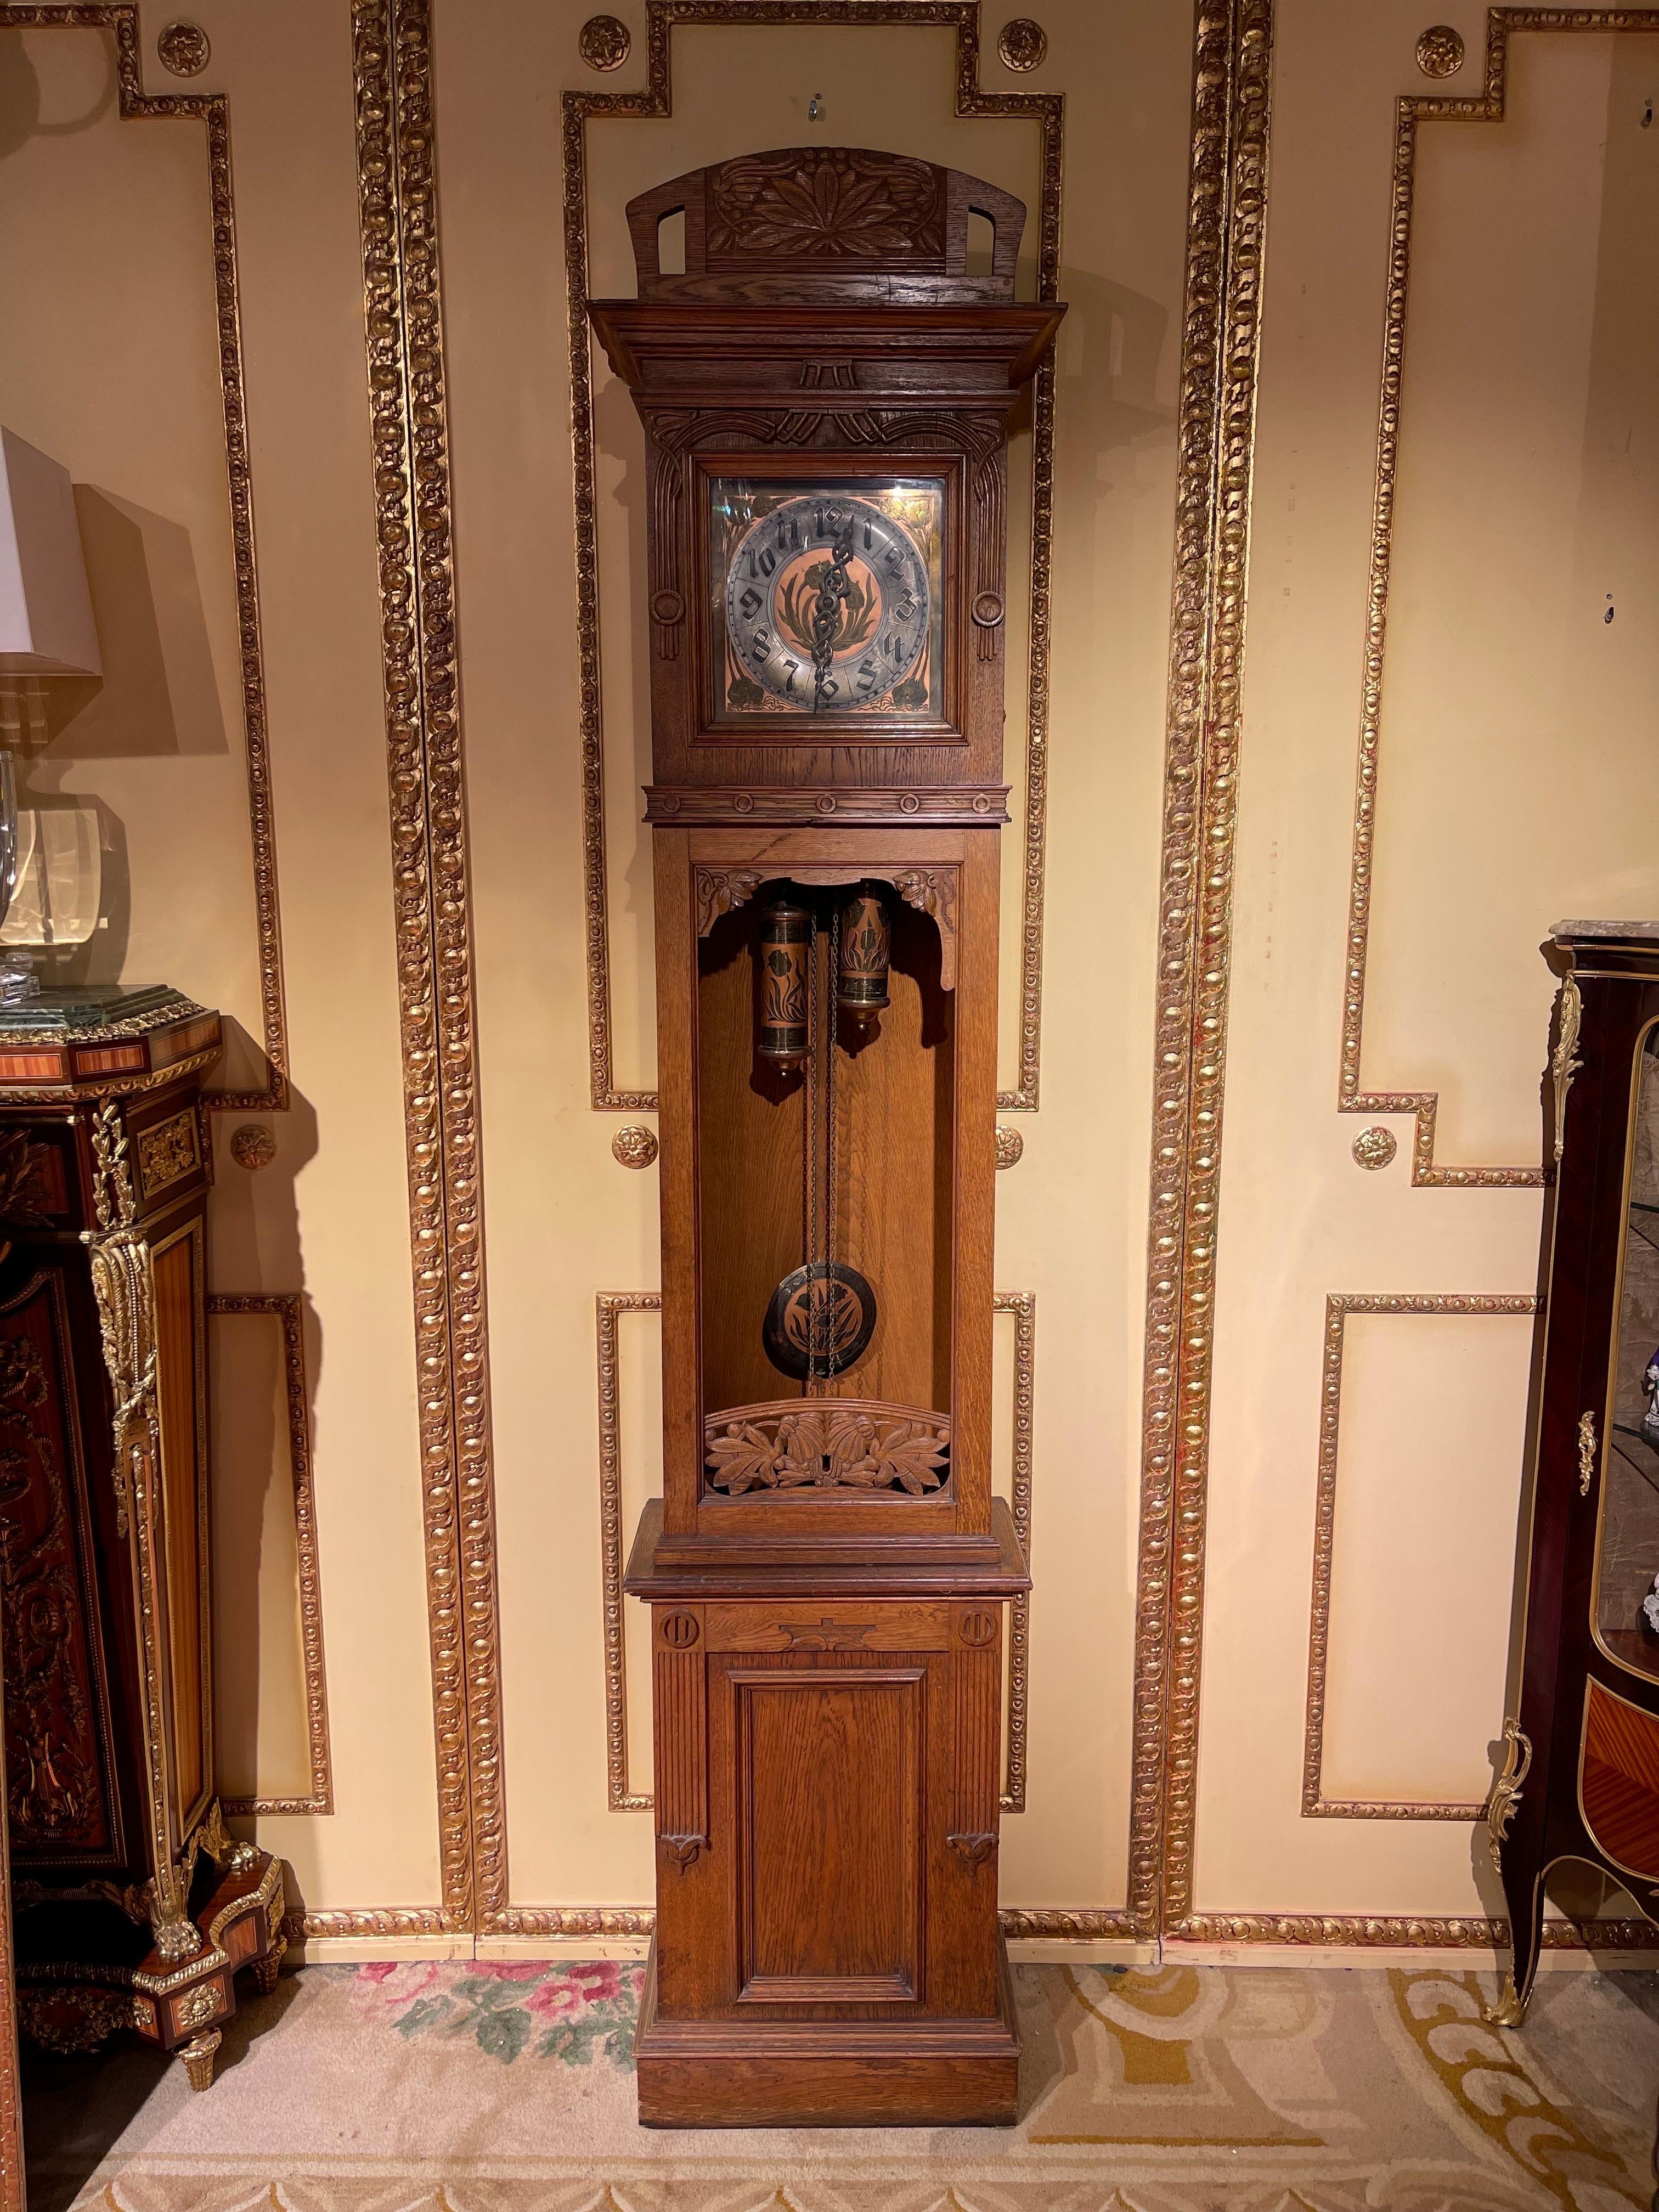 Antique Art Nouveau grandfather clock, Germany 1900.

Solid oak wood, finely carved body with carved floral accents. The movement is an original work by Gustav-Becker in Germany.

*Gustav Becker is known for its high-quality, durable and solid